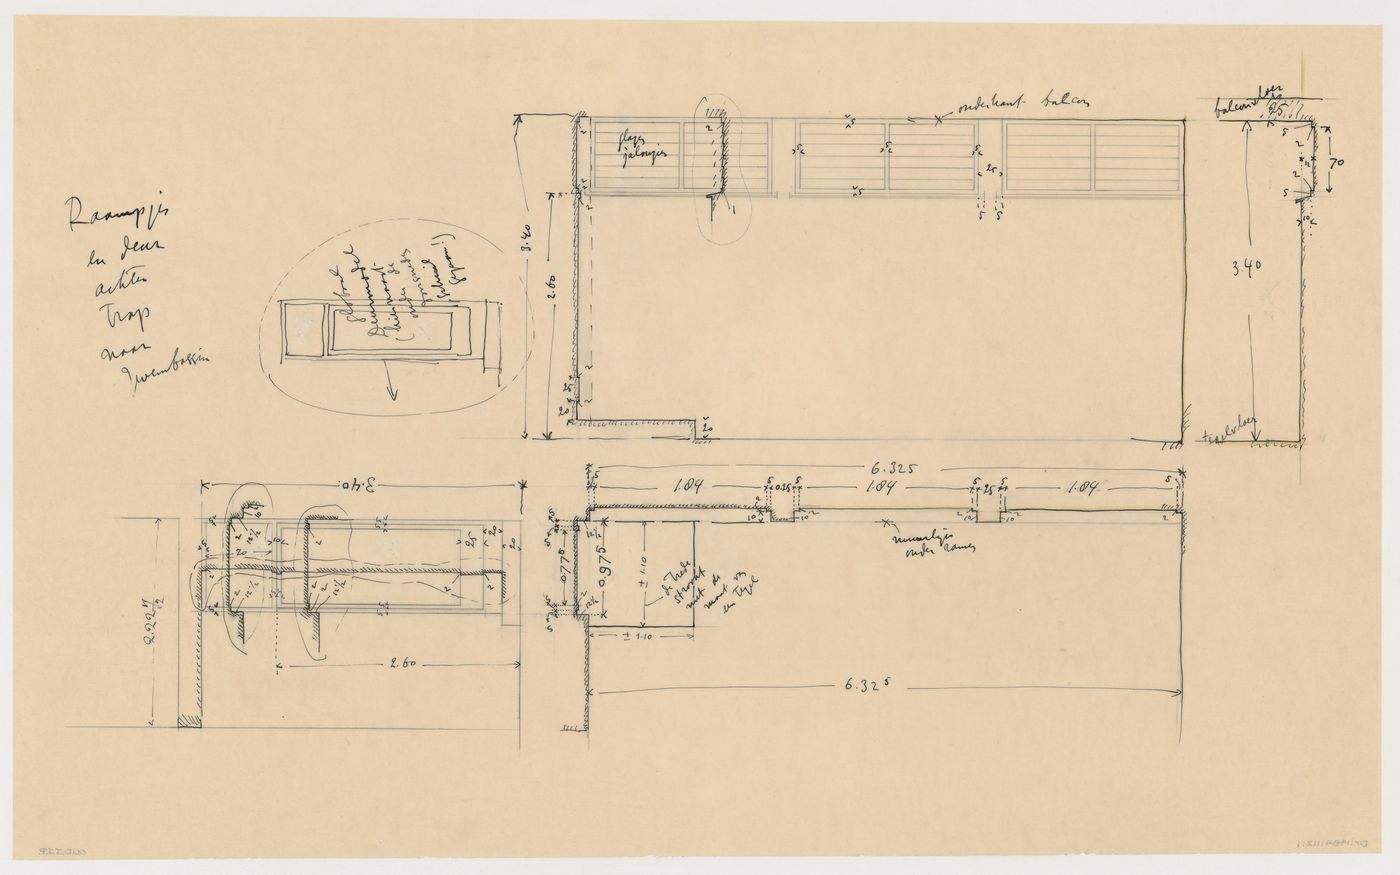 Rear elevations and plan for window and door specifications for Johnson House, Pinehurst, North Carolina